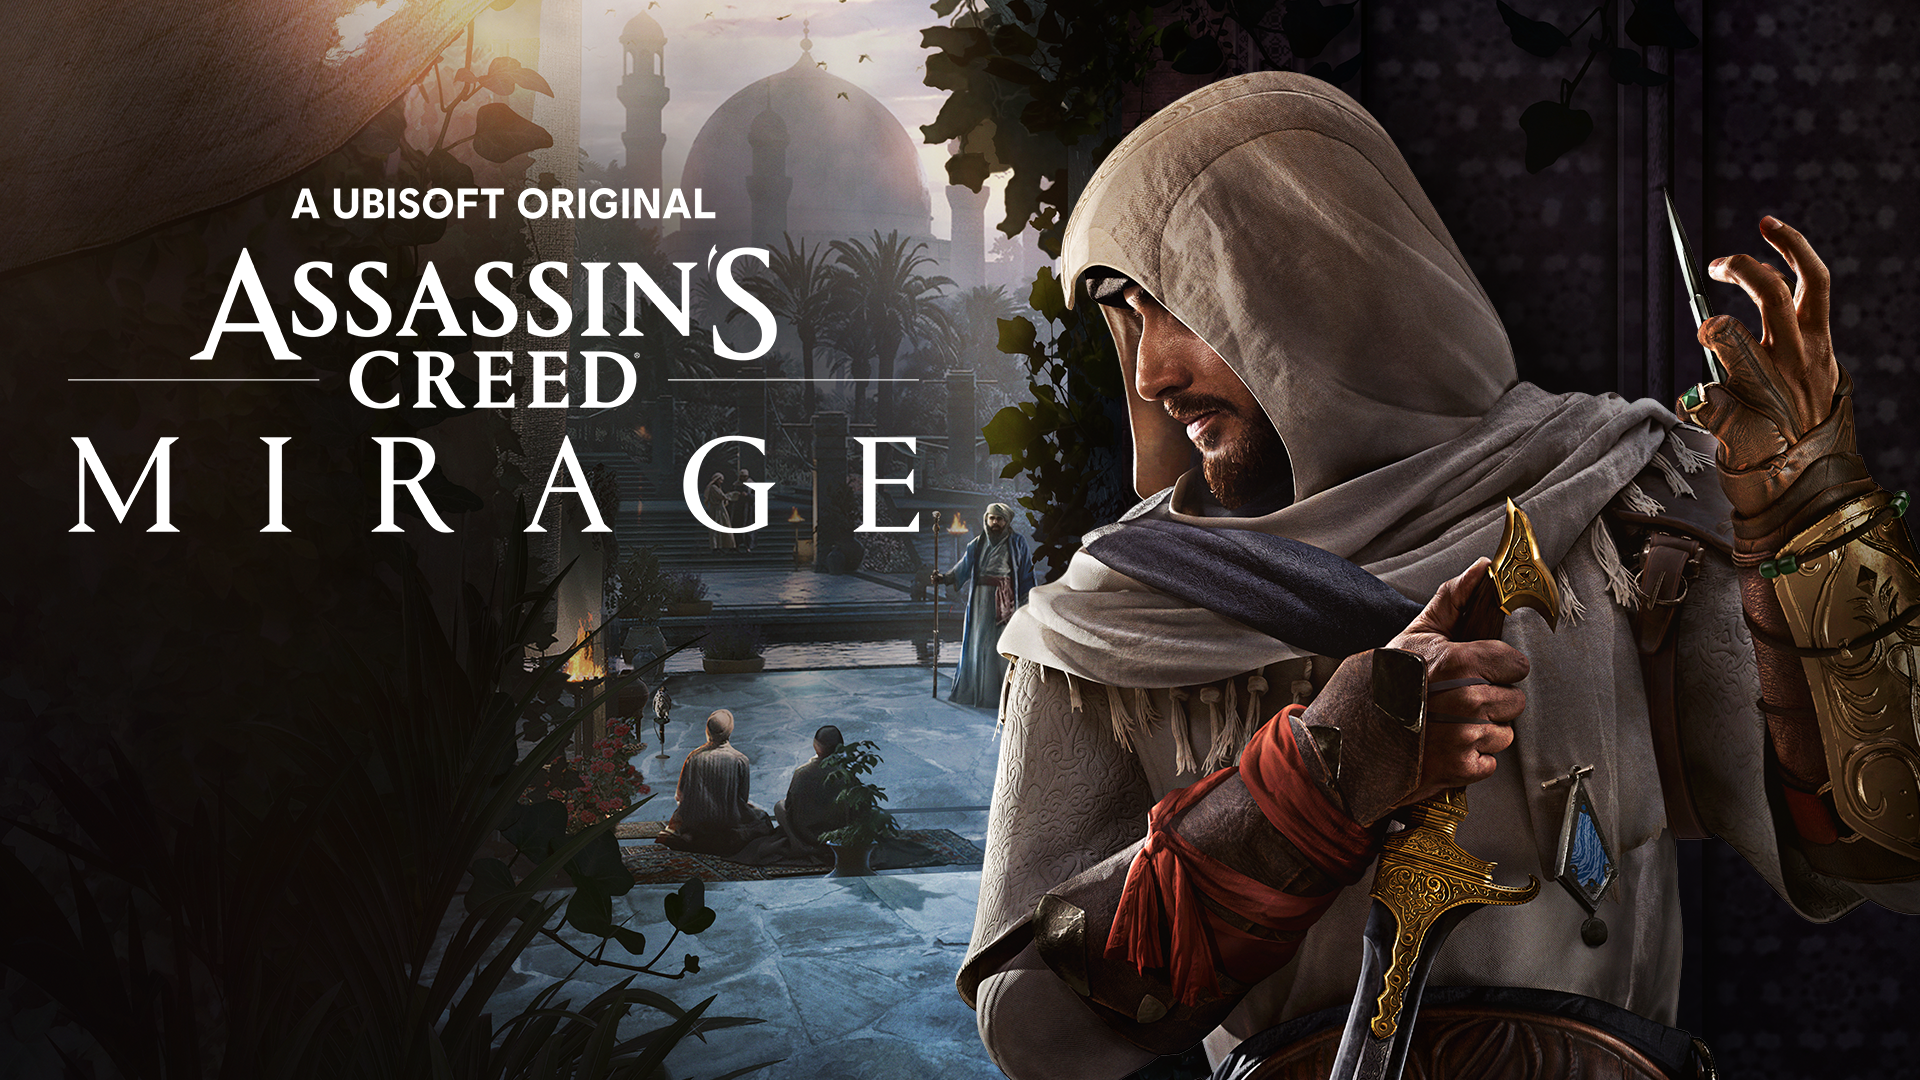 Assassin’s Creed Mirage Review for Players Before Deciding to Buy the Game